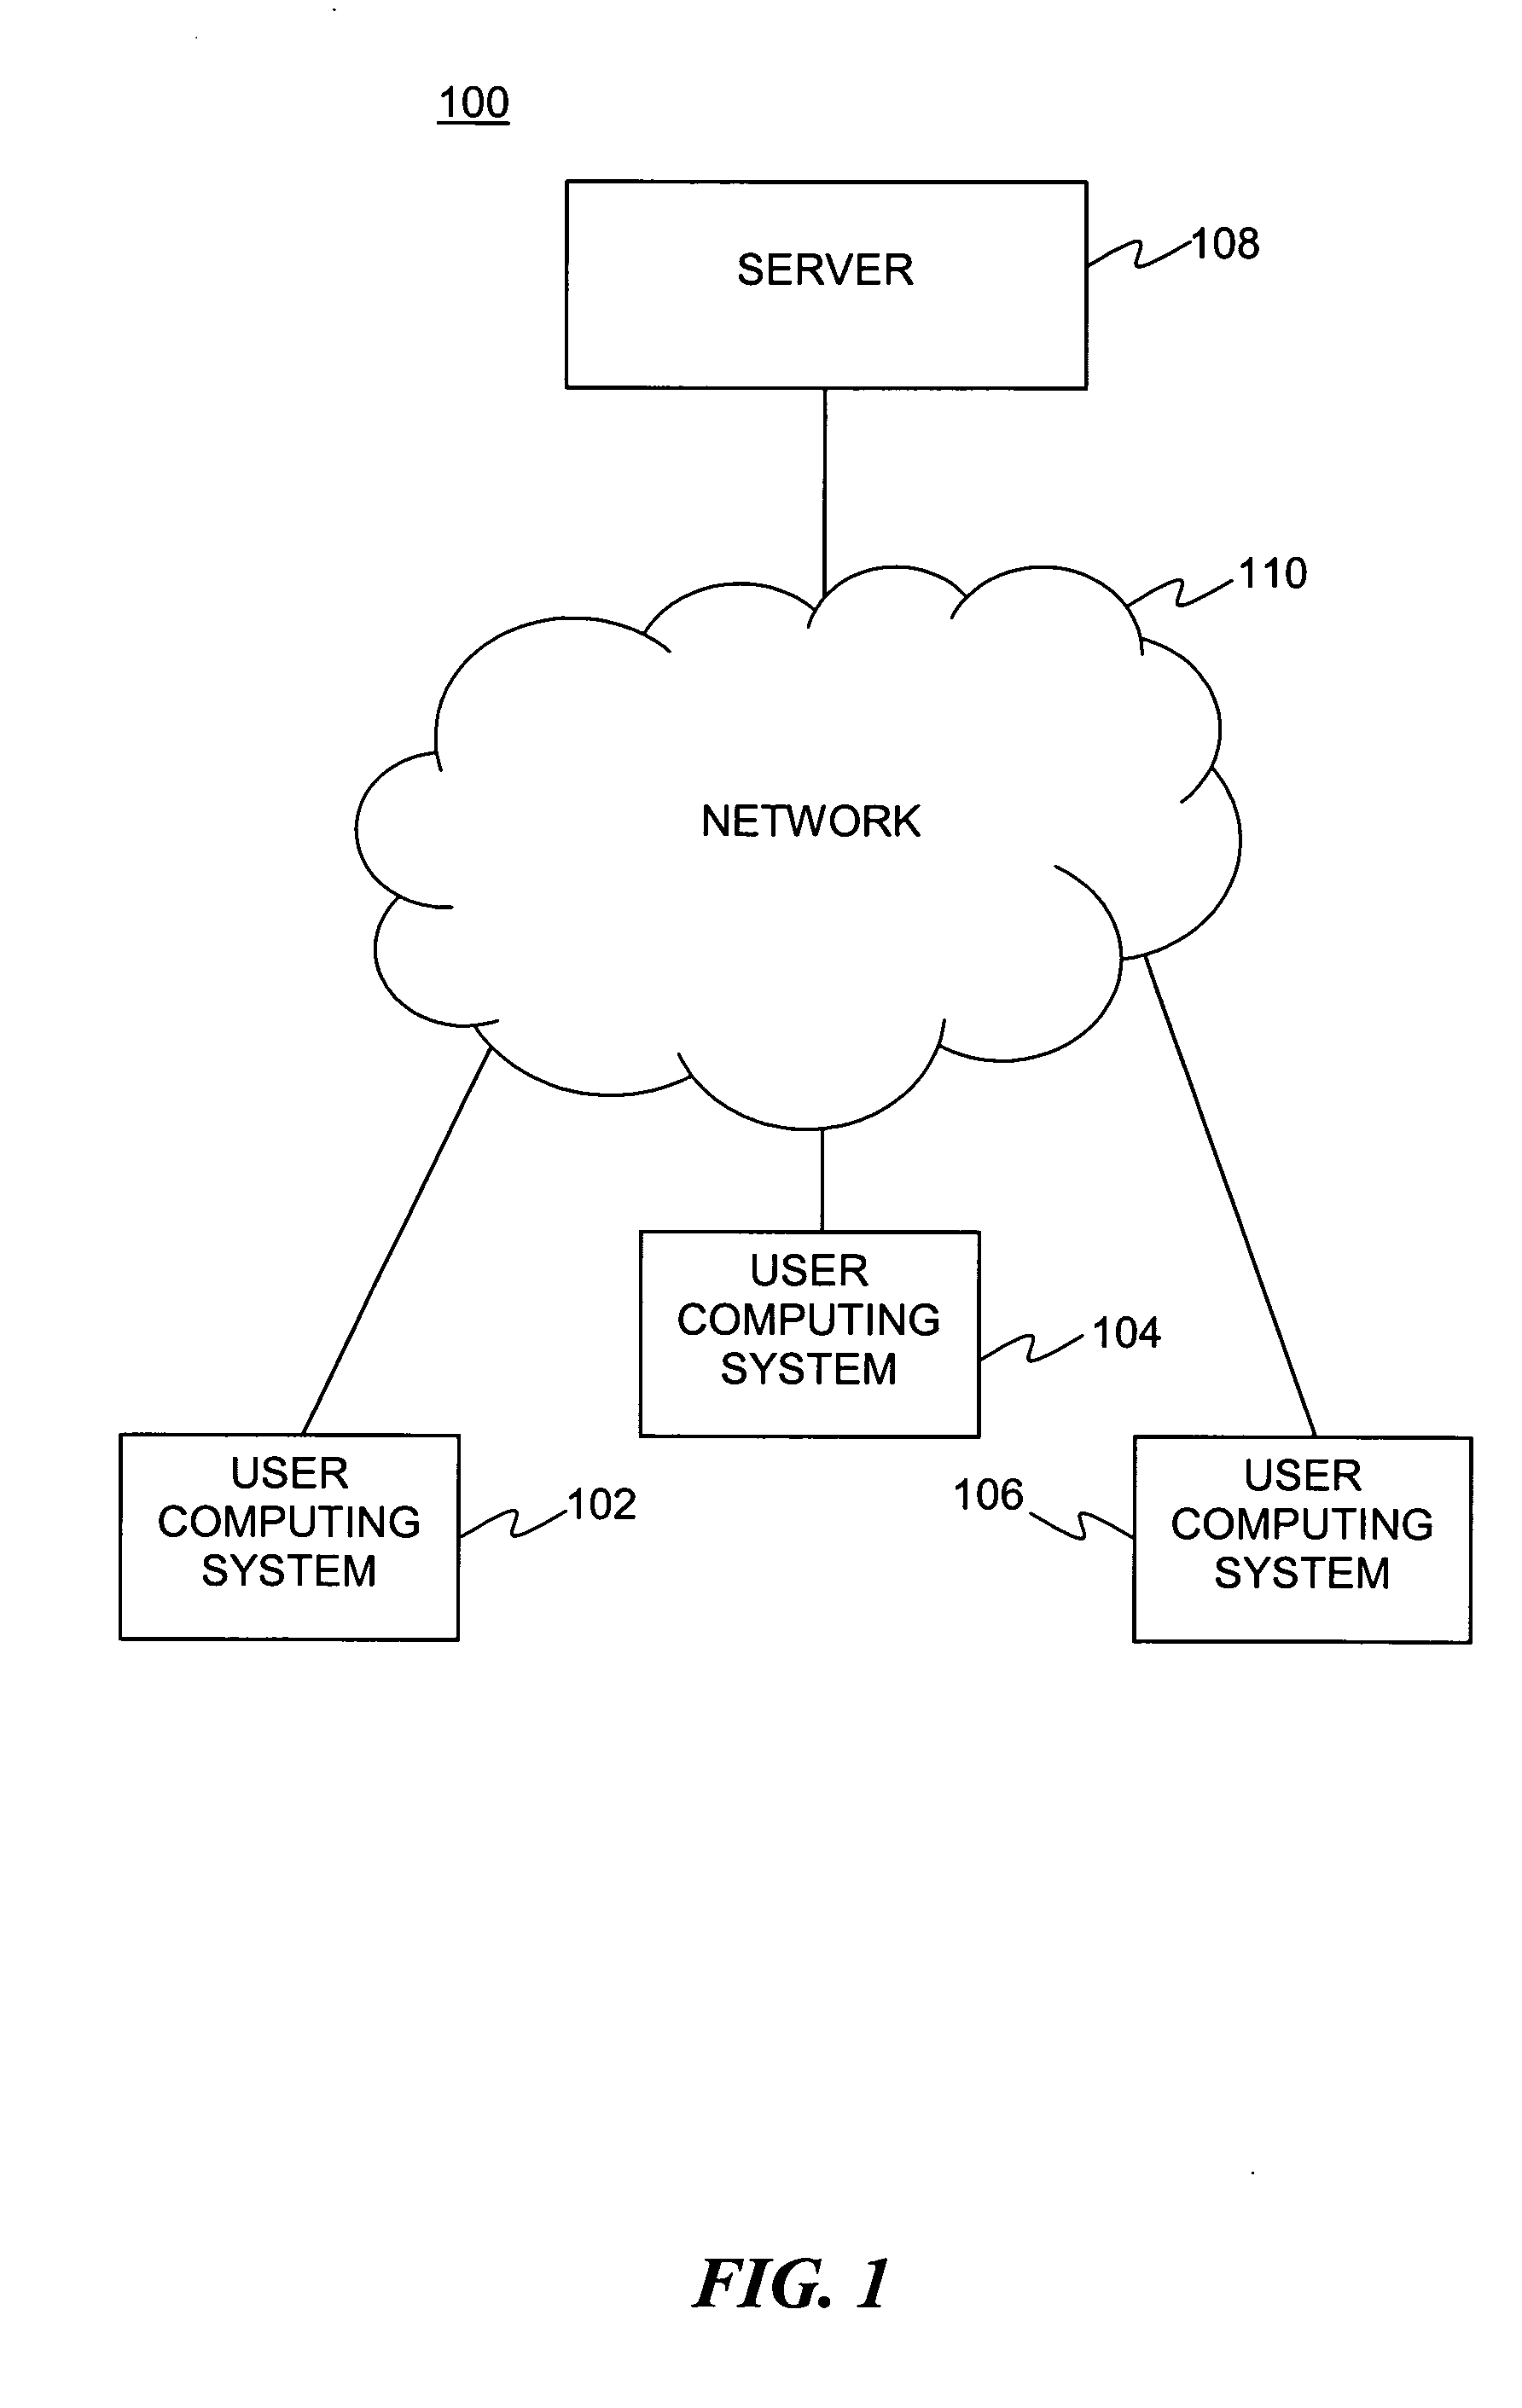 Method, system and program product for monitoring an online card game to provide a summary view and/or real-time notifications